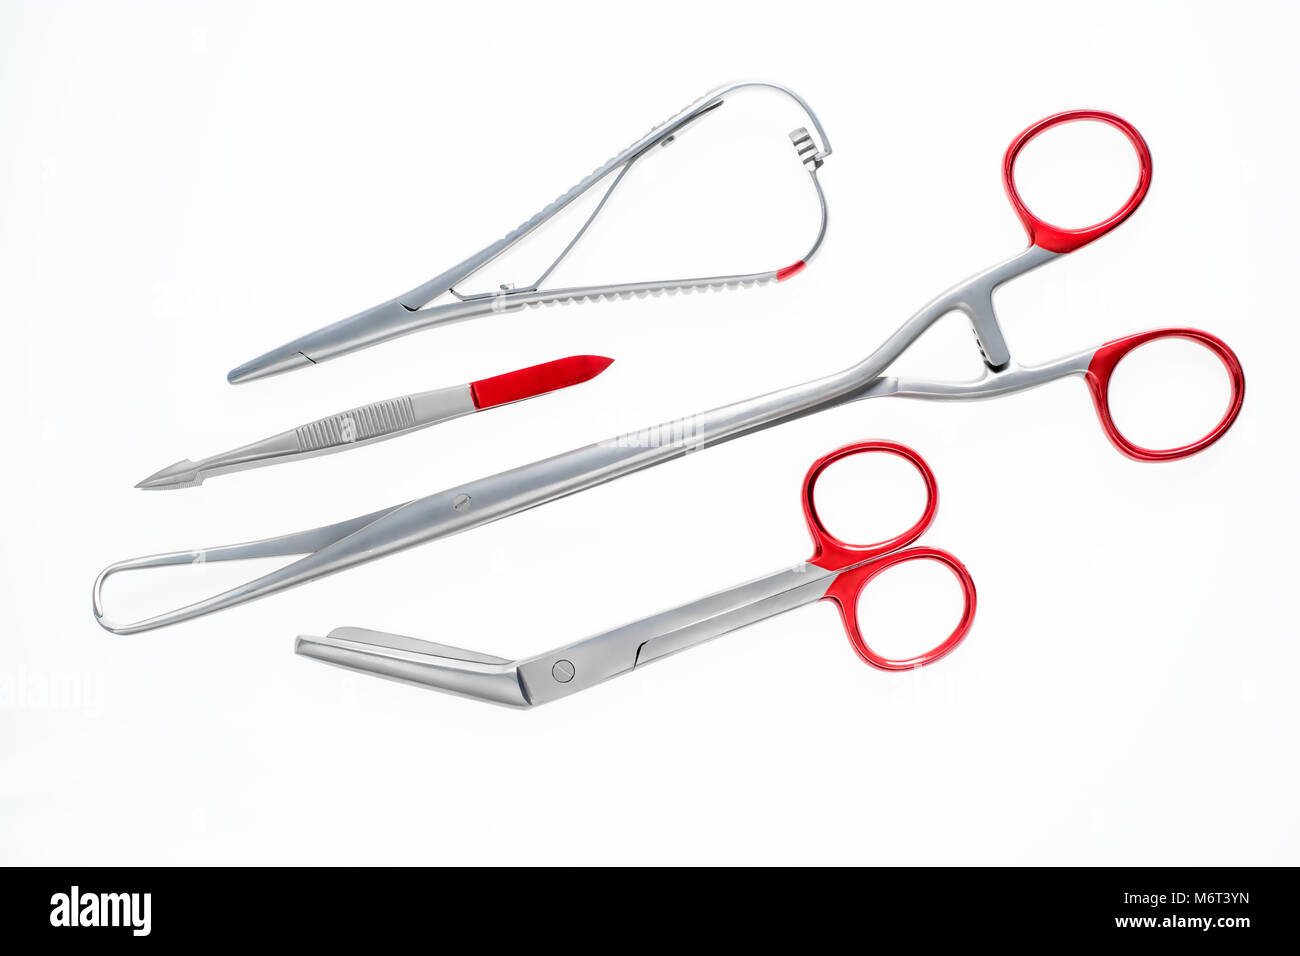 Diverse medical and surgery instruments isolated in white Stock Photo